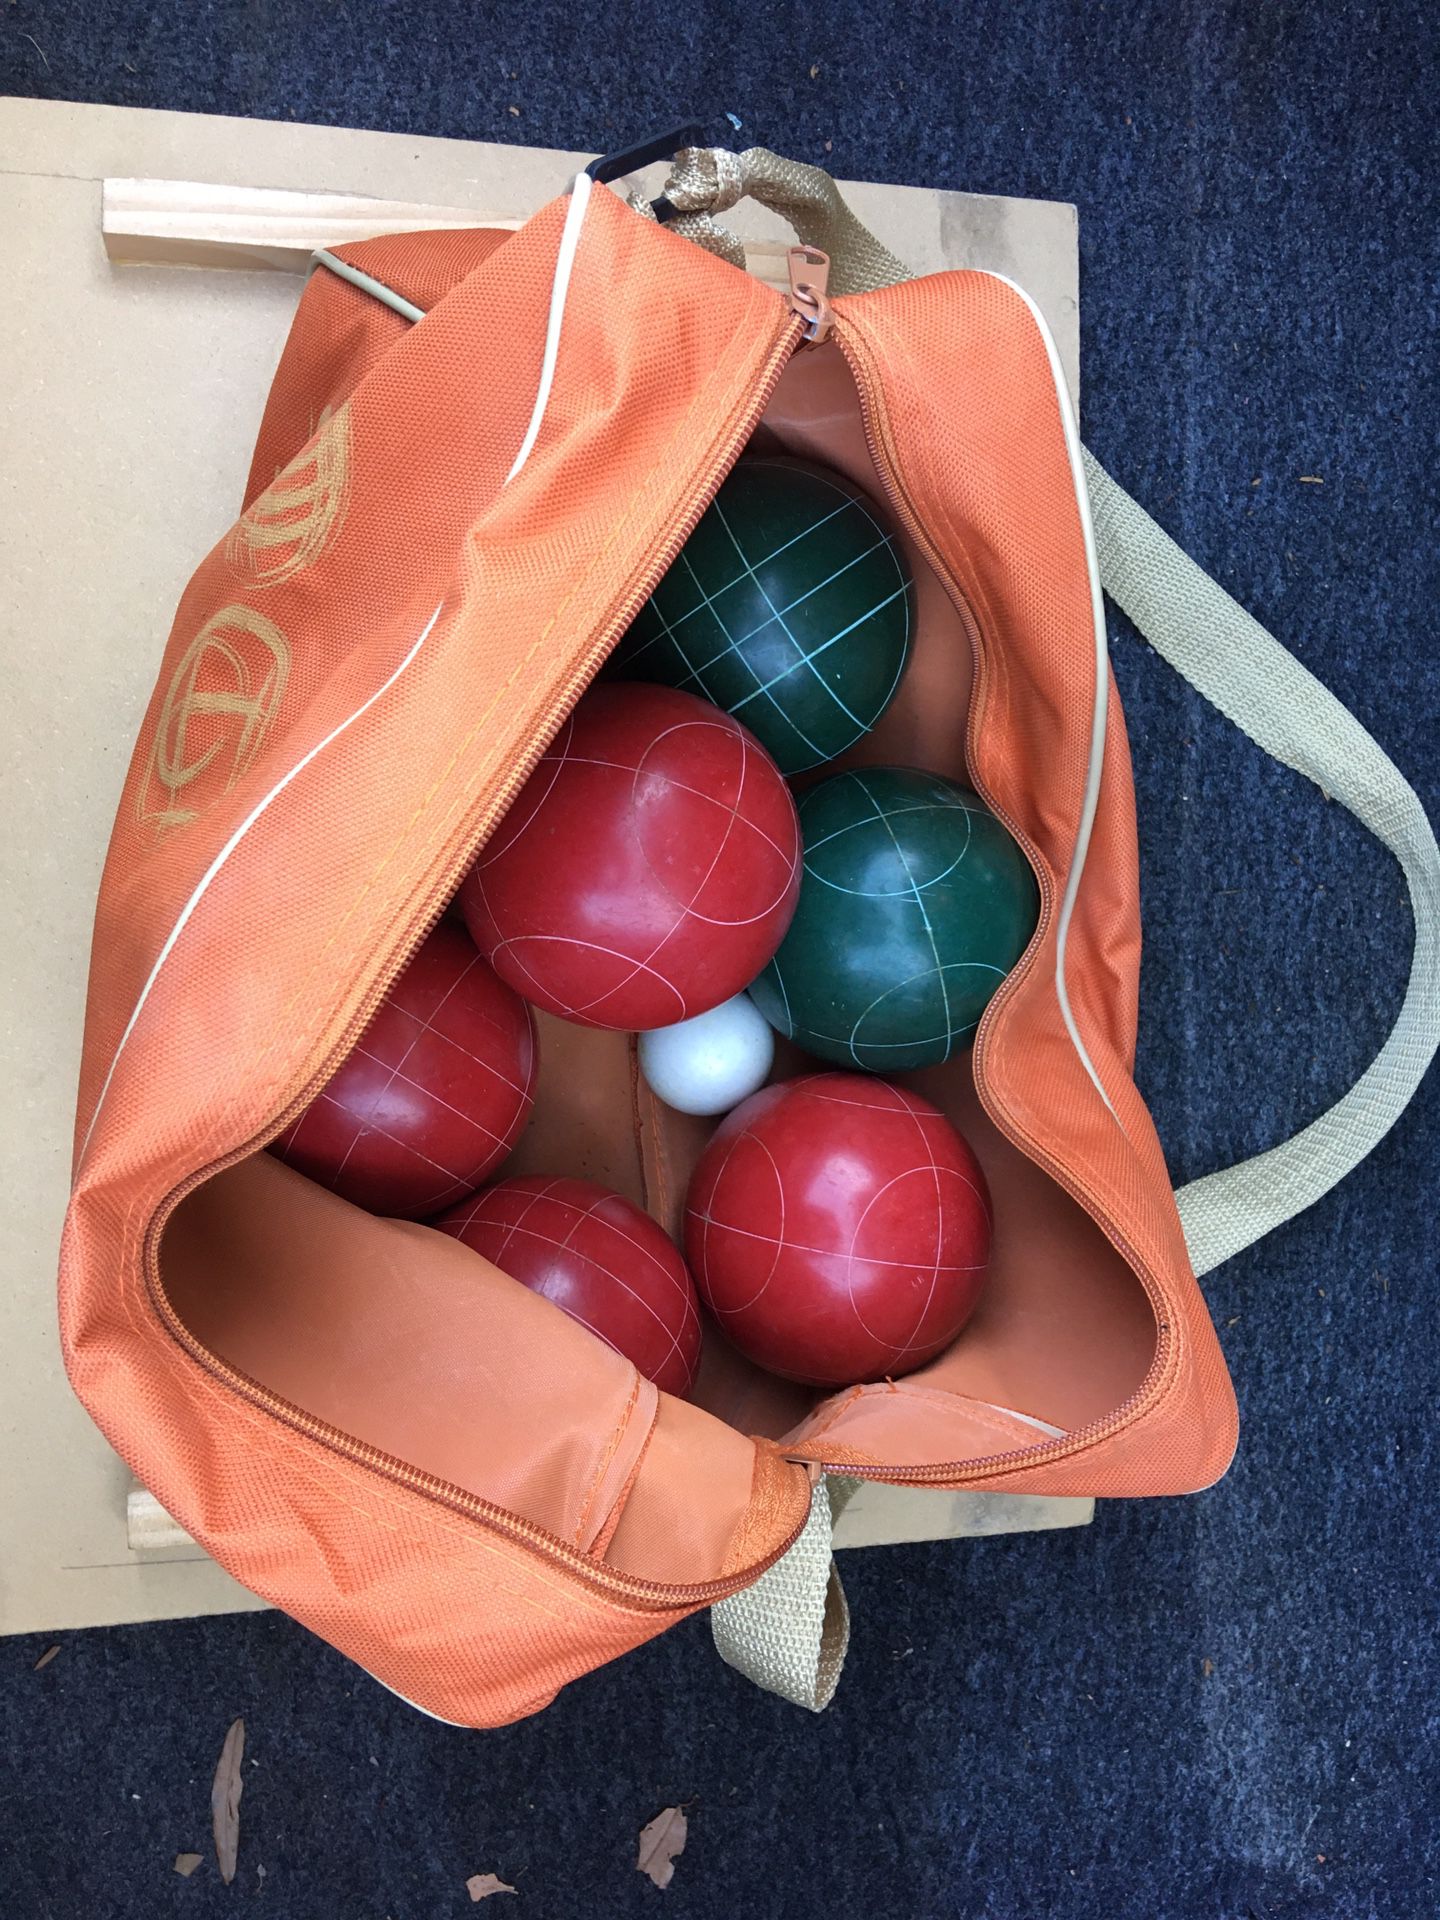 Bocce ball set and carrying bag.